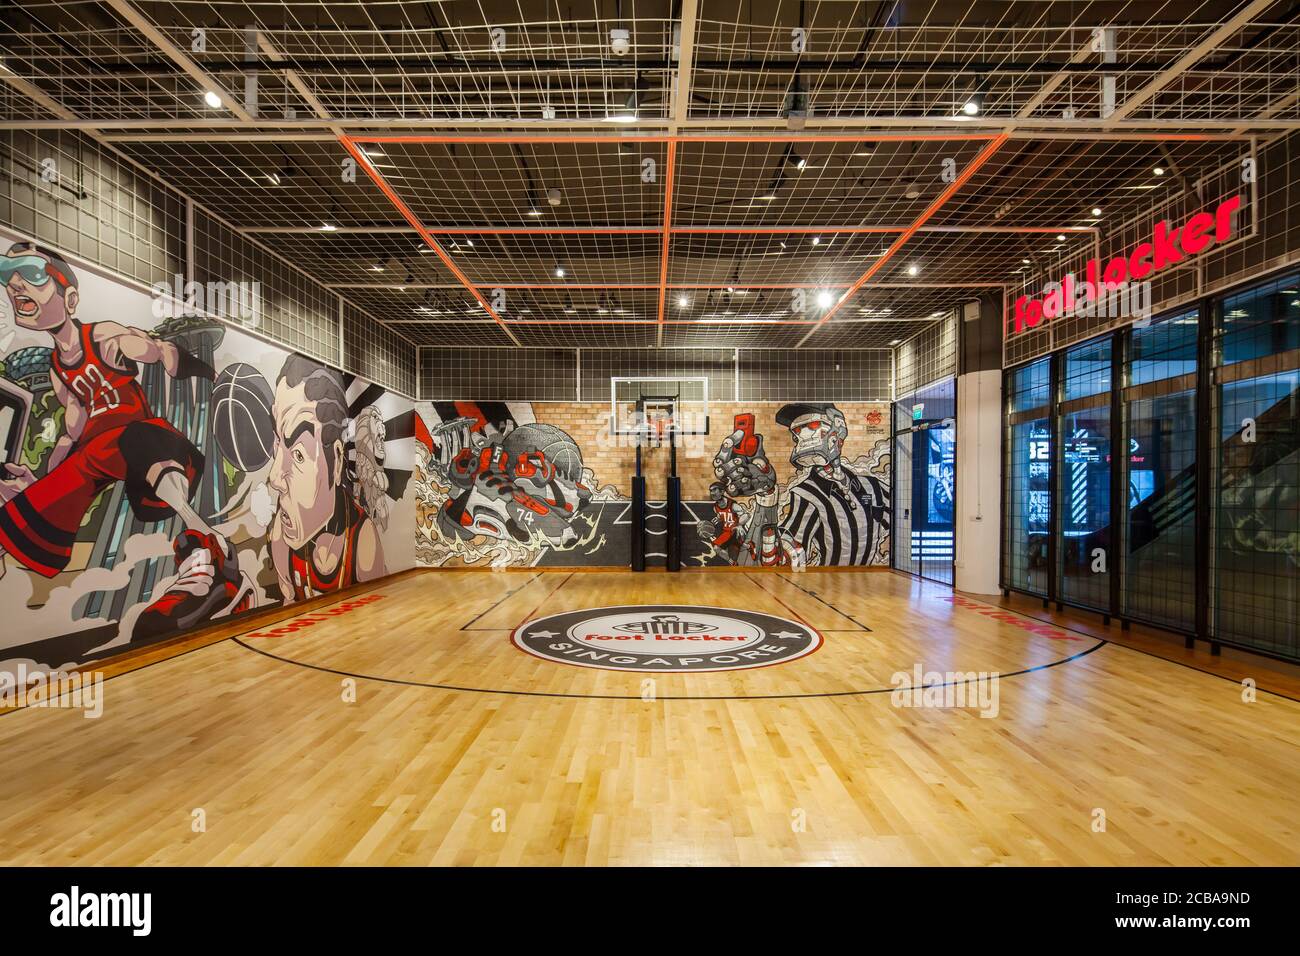 A vibrant graphic basketball court at the basement by Foot Locker, Orchard Gateway at Emerald, Singapore Stock Photo